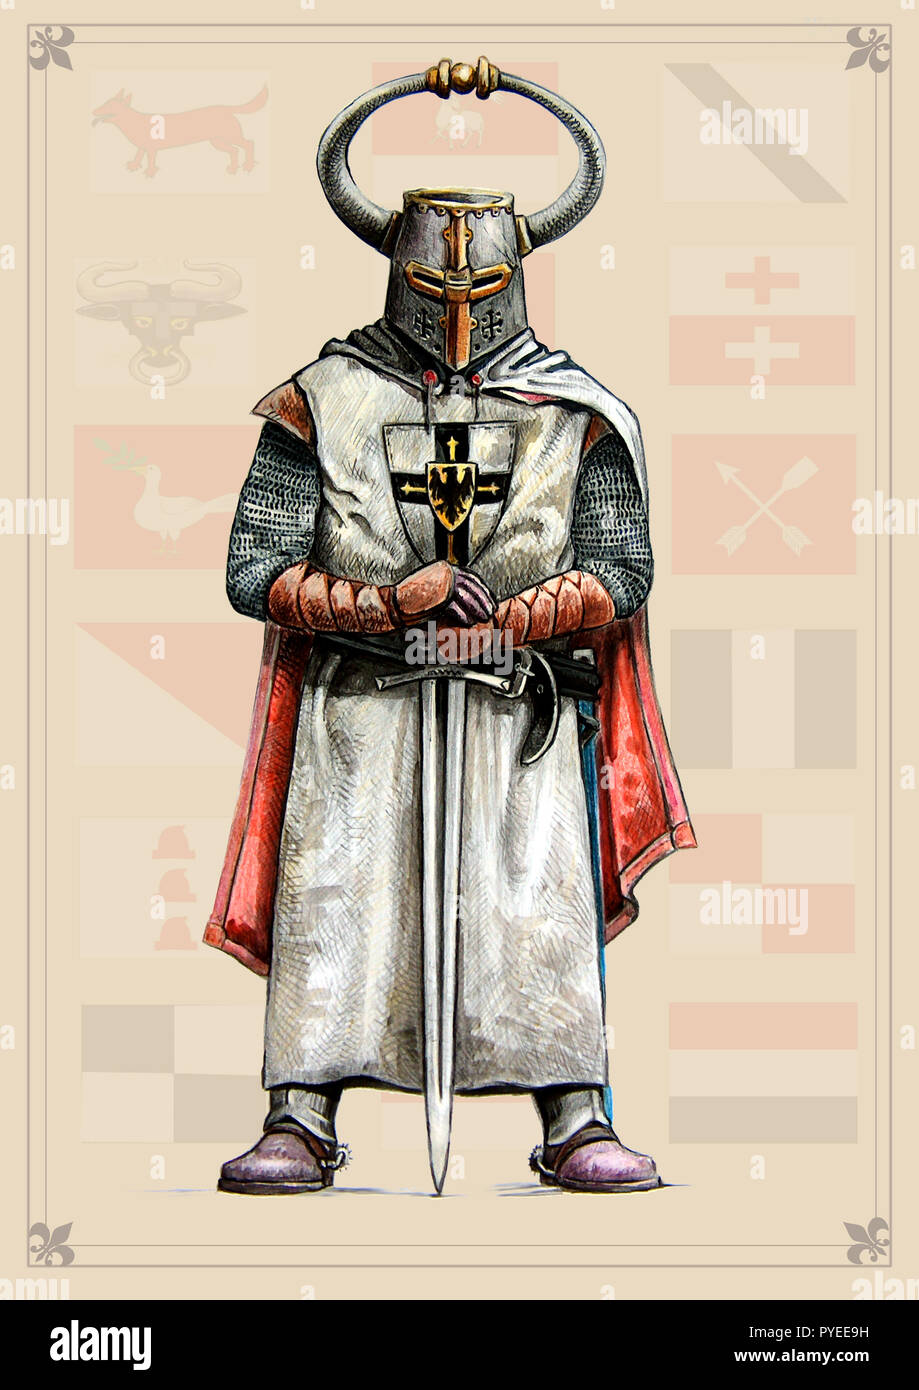 Teutonic knight illustration. Medieval knight with helmet. Crusader with sword. Stock Photo